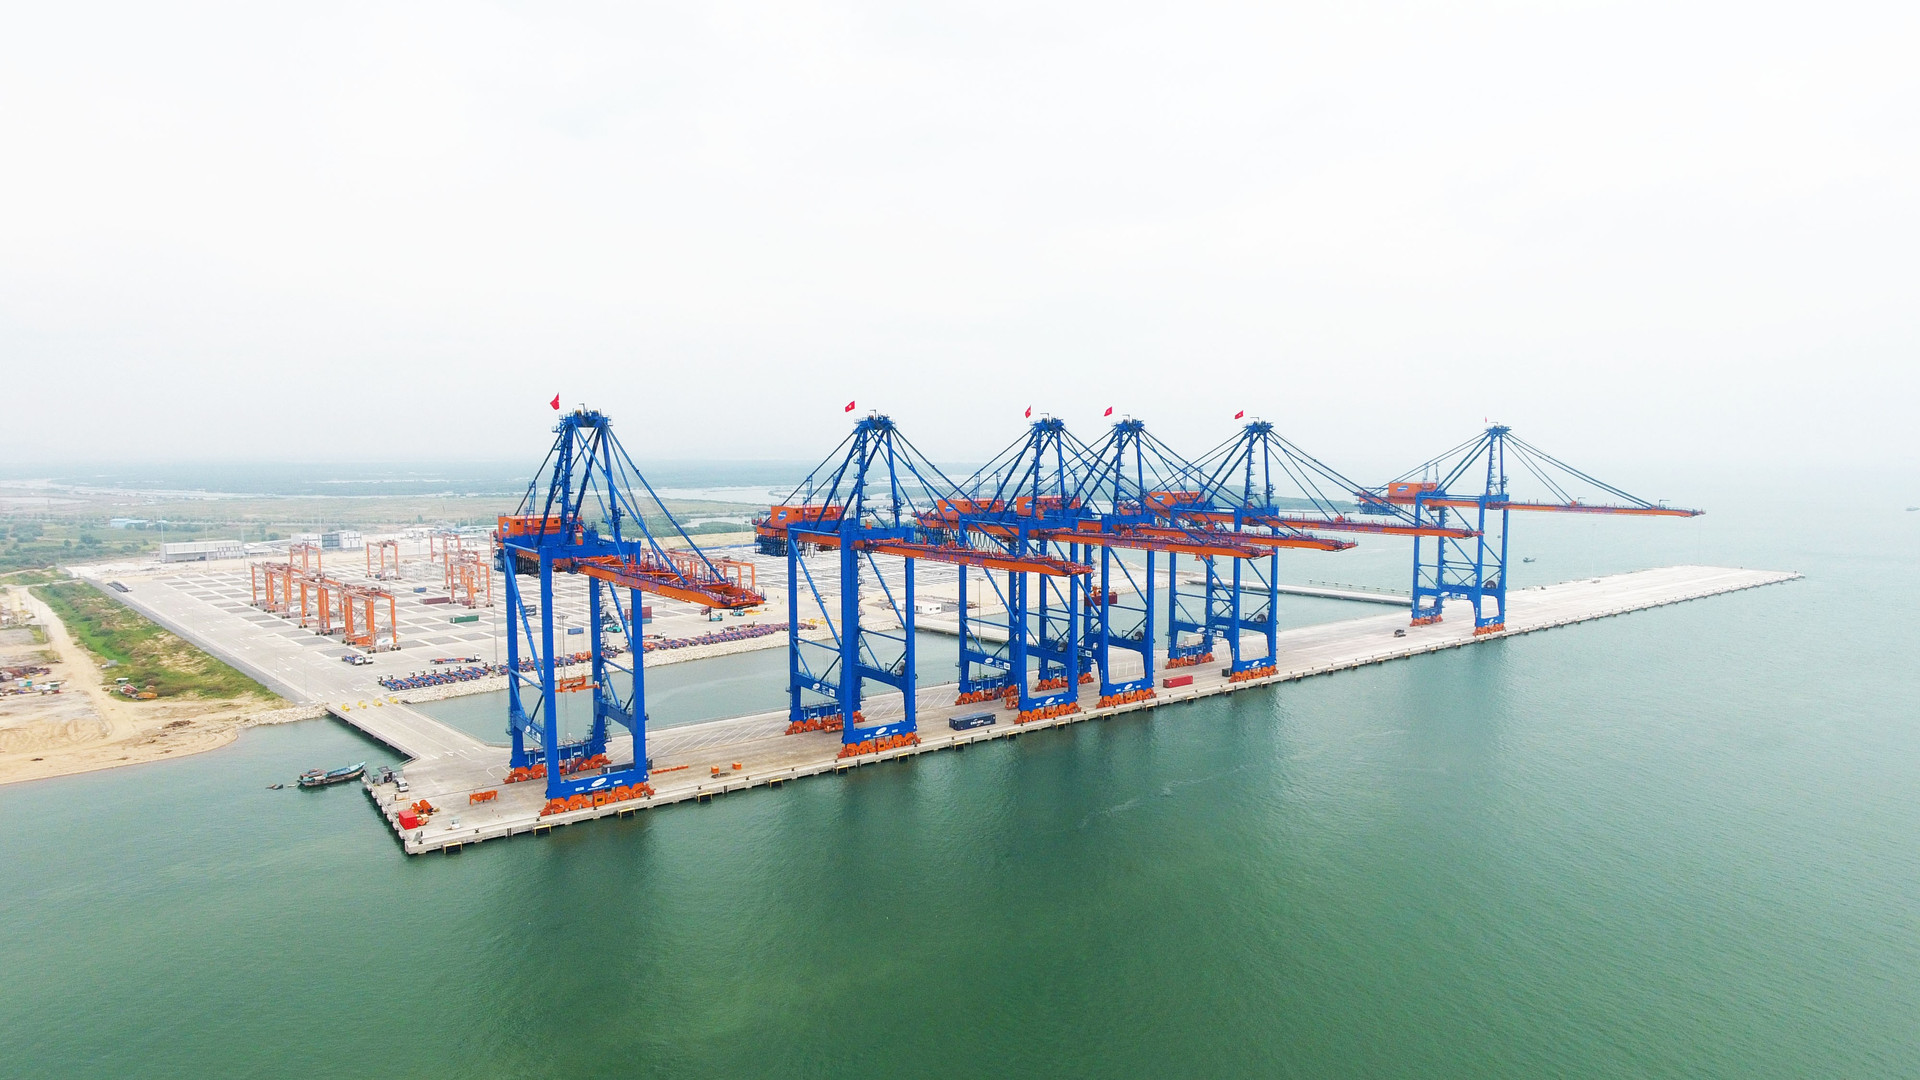 Six STS cranes manufactured by Doosan Vina are operating at Gemalink port